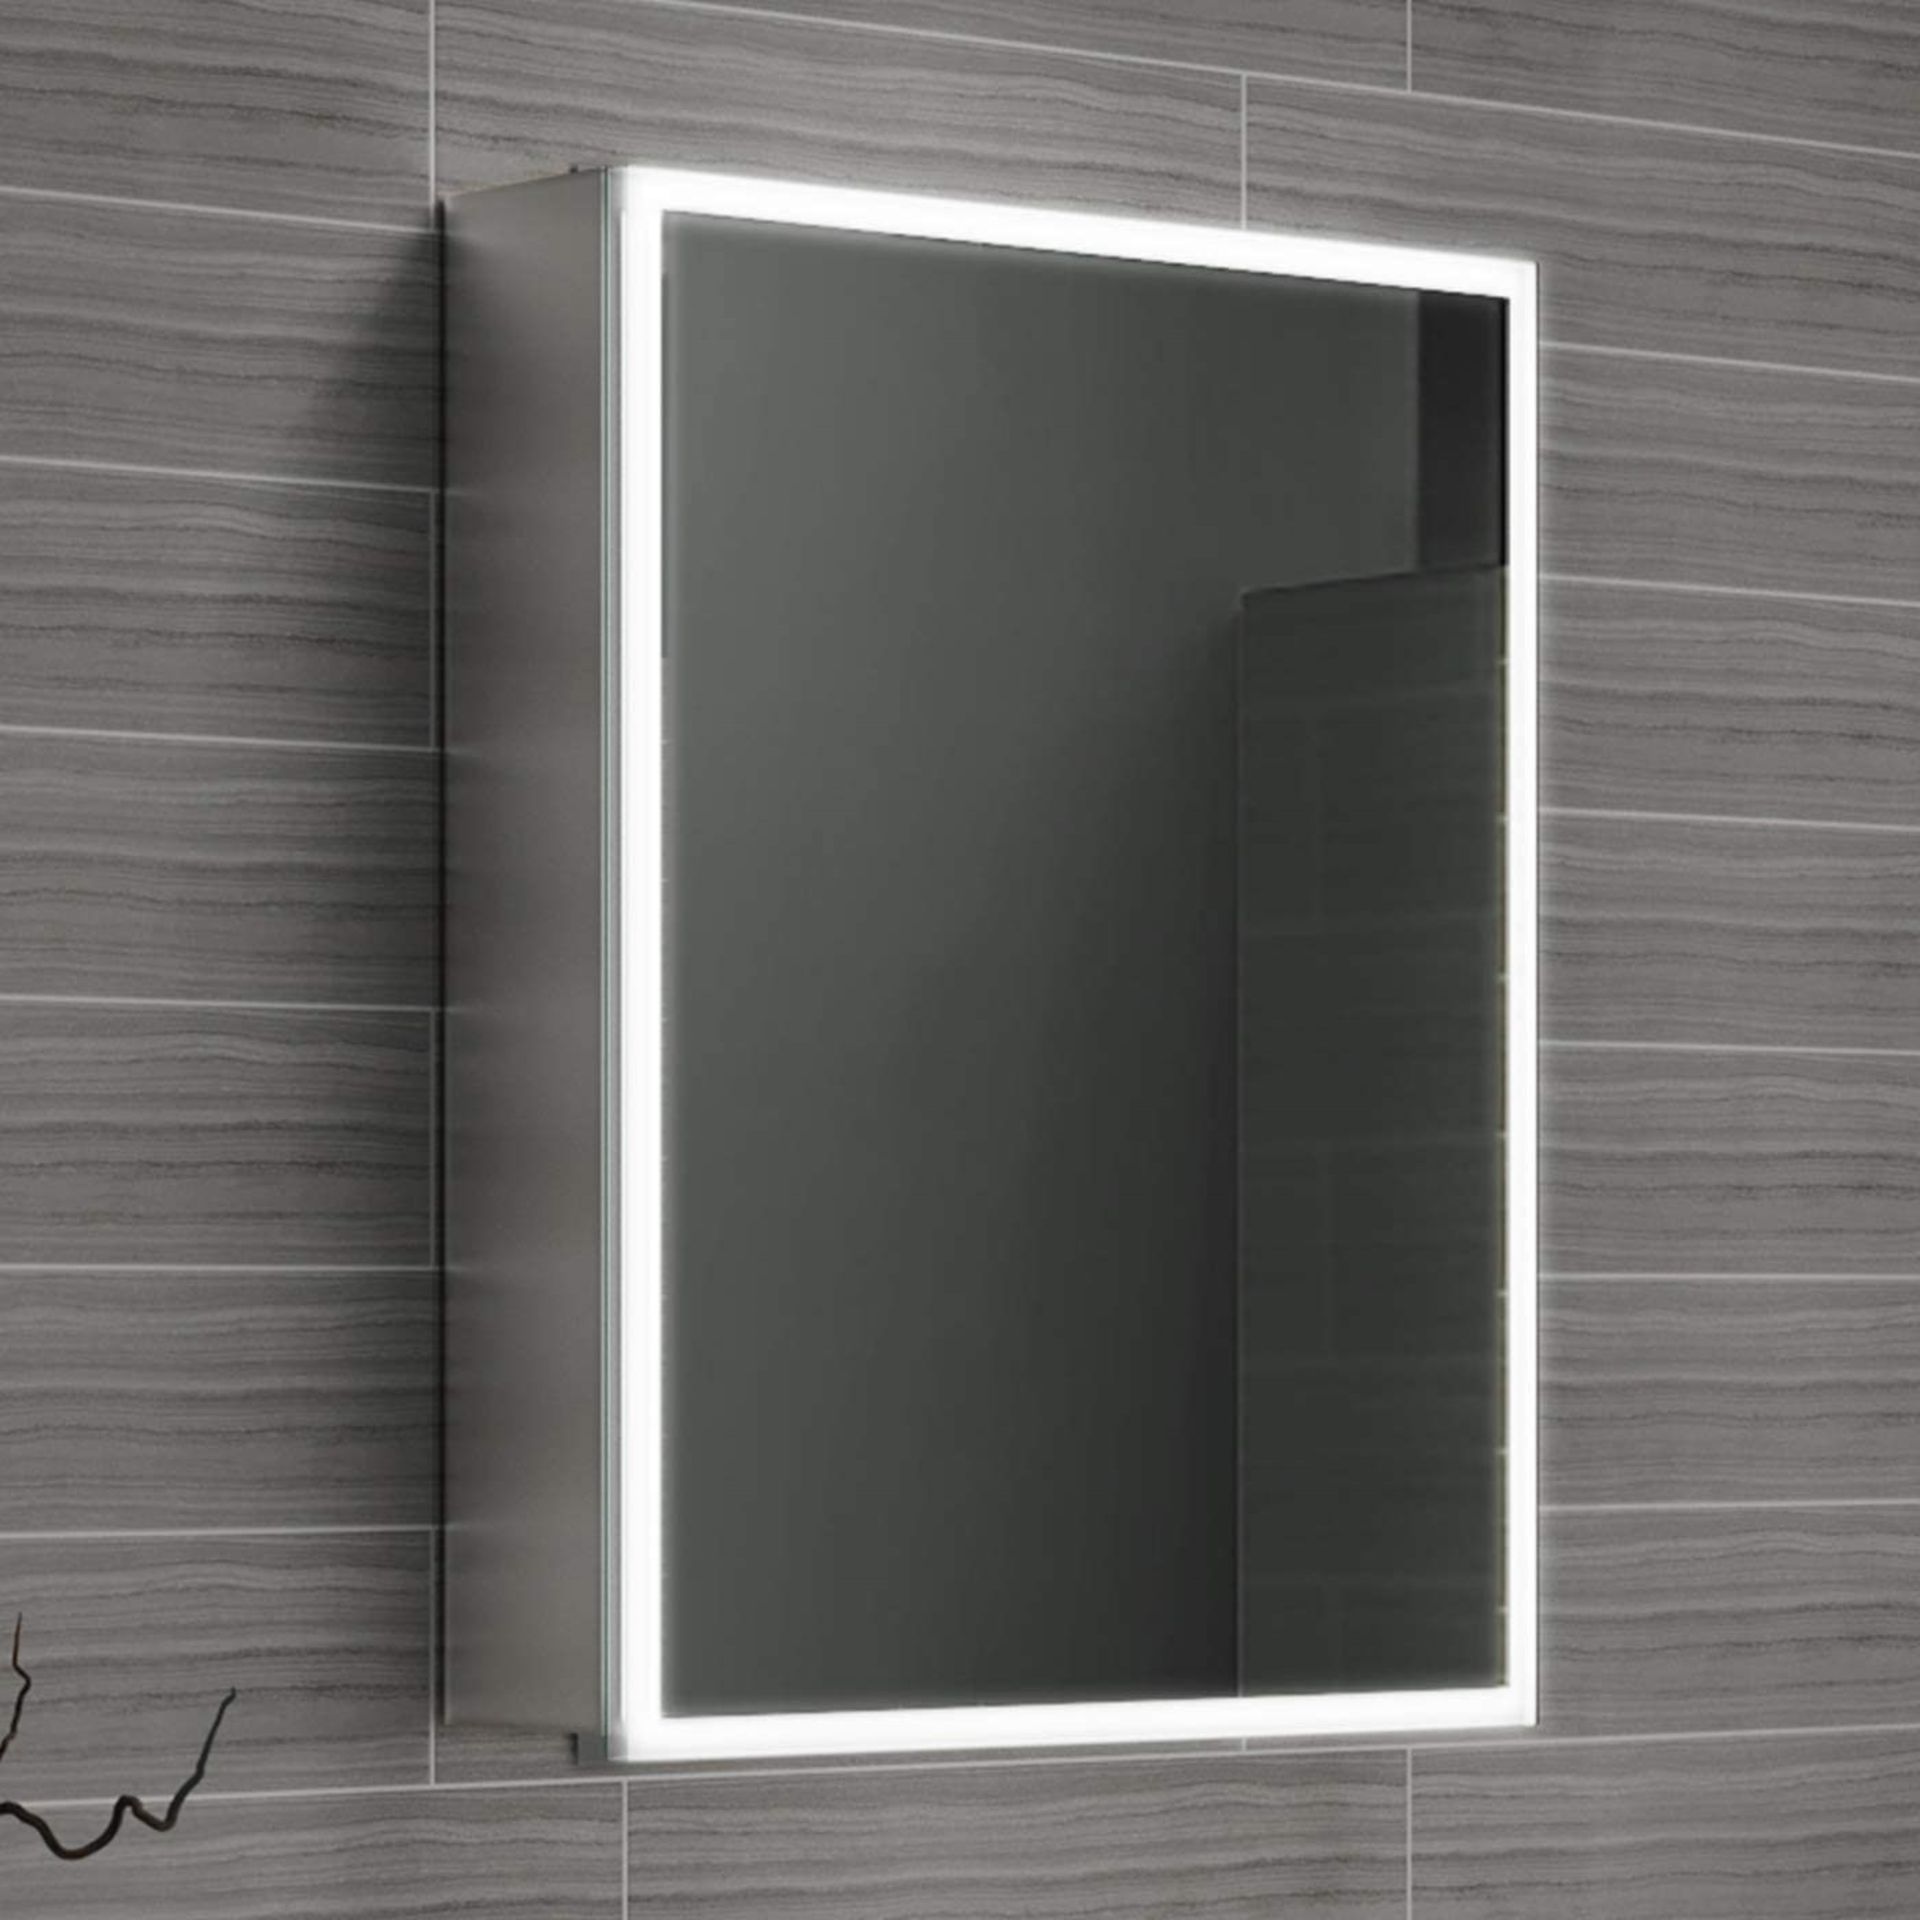 NEW & BOXED 450 x 600 Cosmic Illuminated Led Mirror Cabinet. RRP £749.99.Mc161.We Love This Mirror